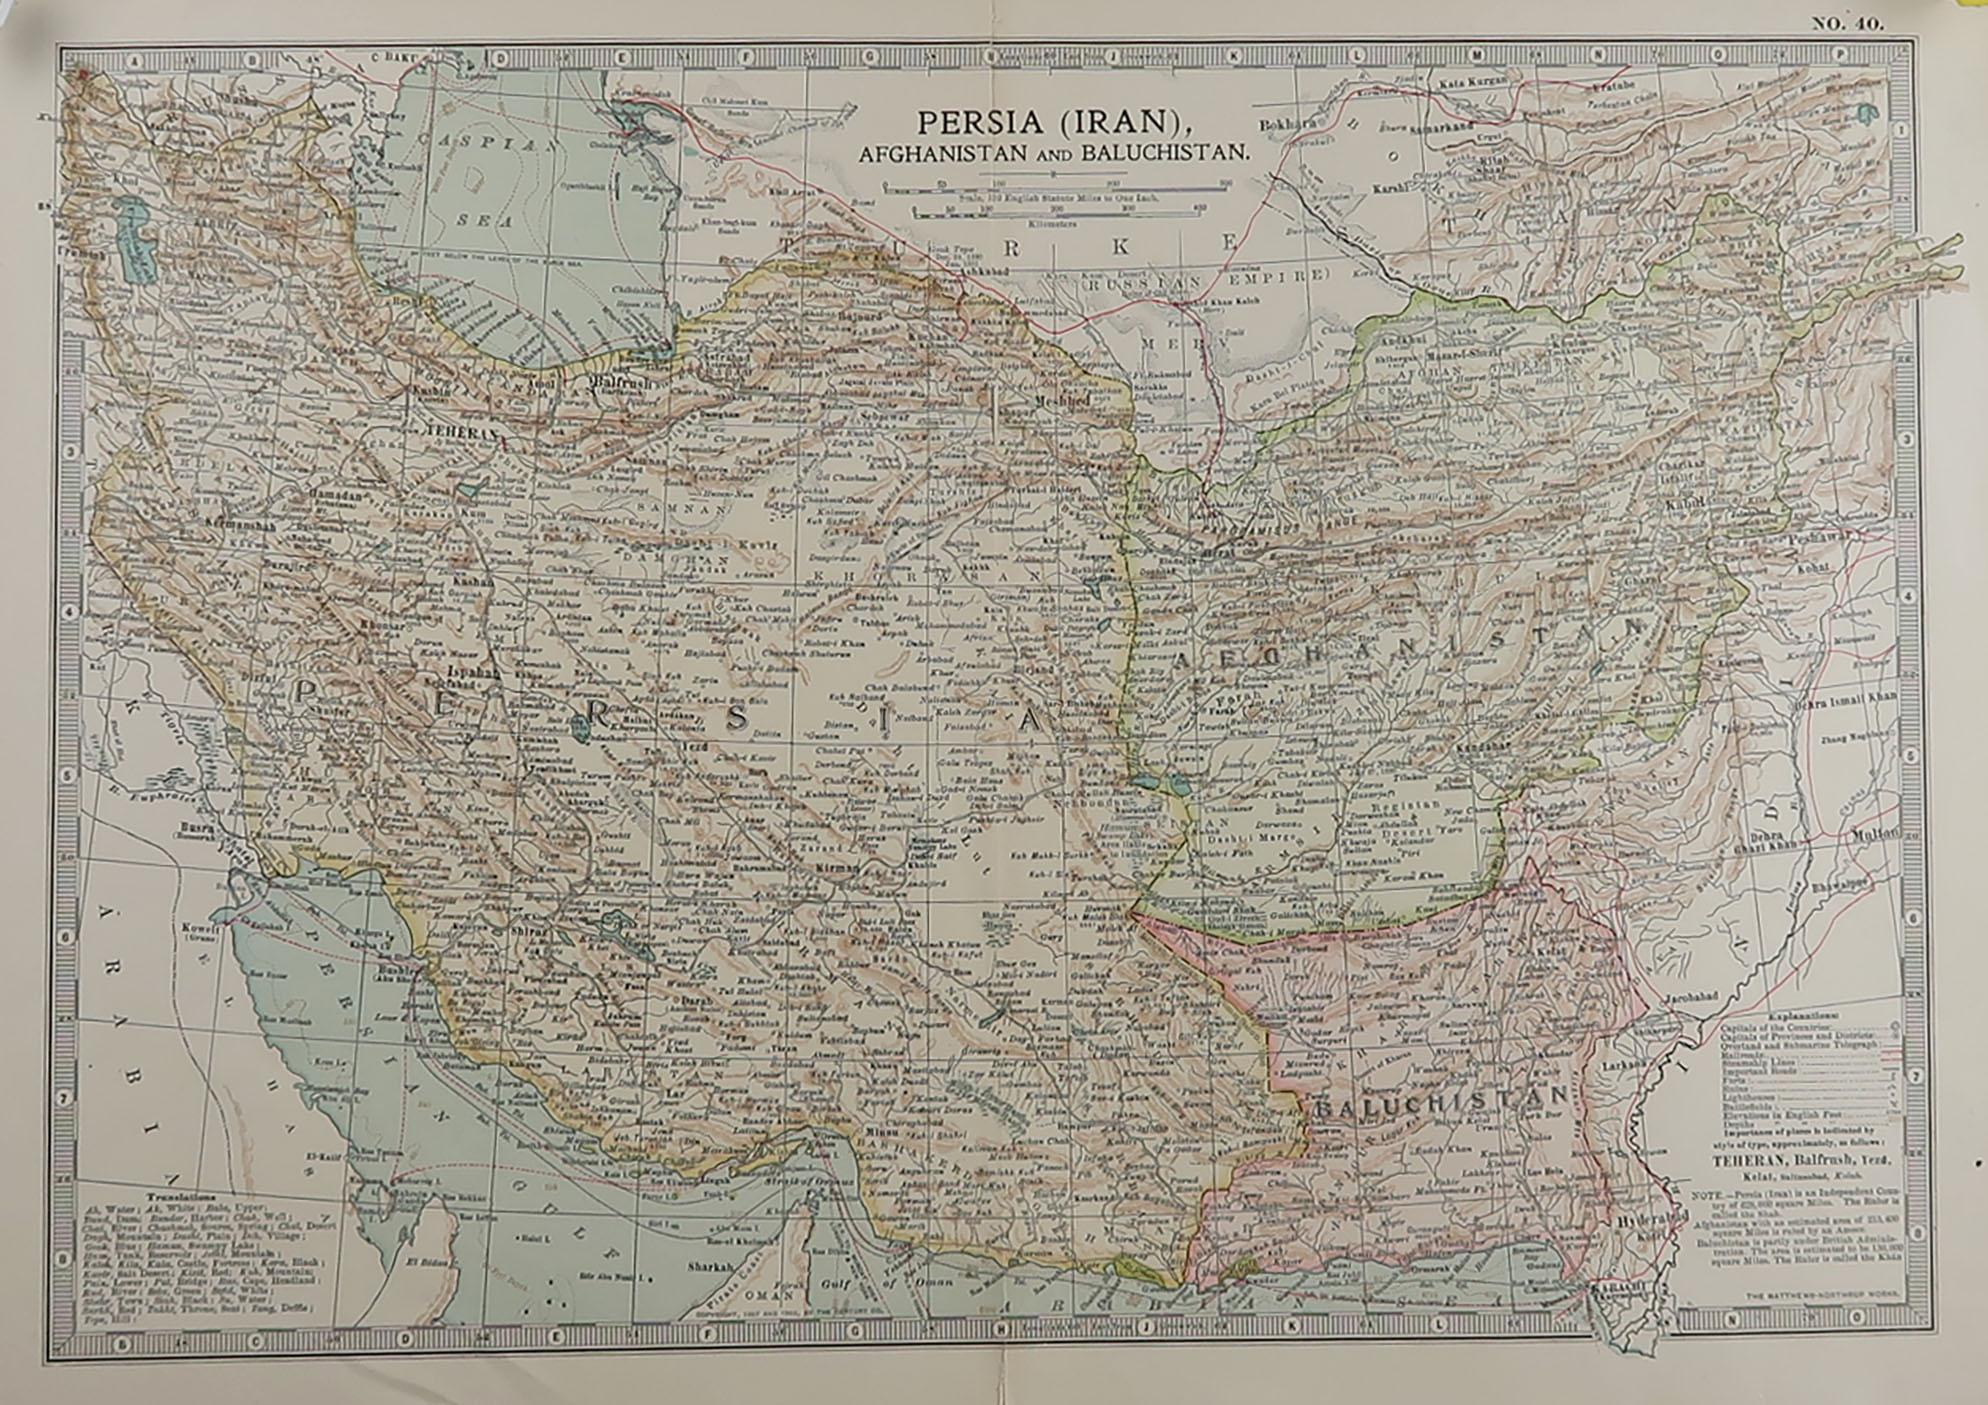 Great map of Persia

Original color.

Published, circa 1890

A couple of minor edge tears. Minor creasing.

Unframed.
 